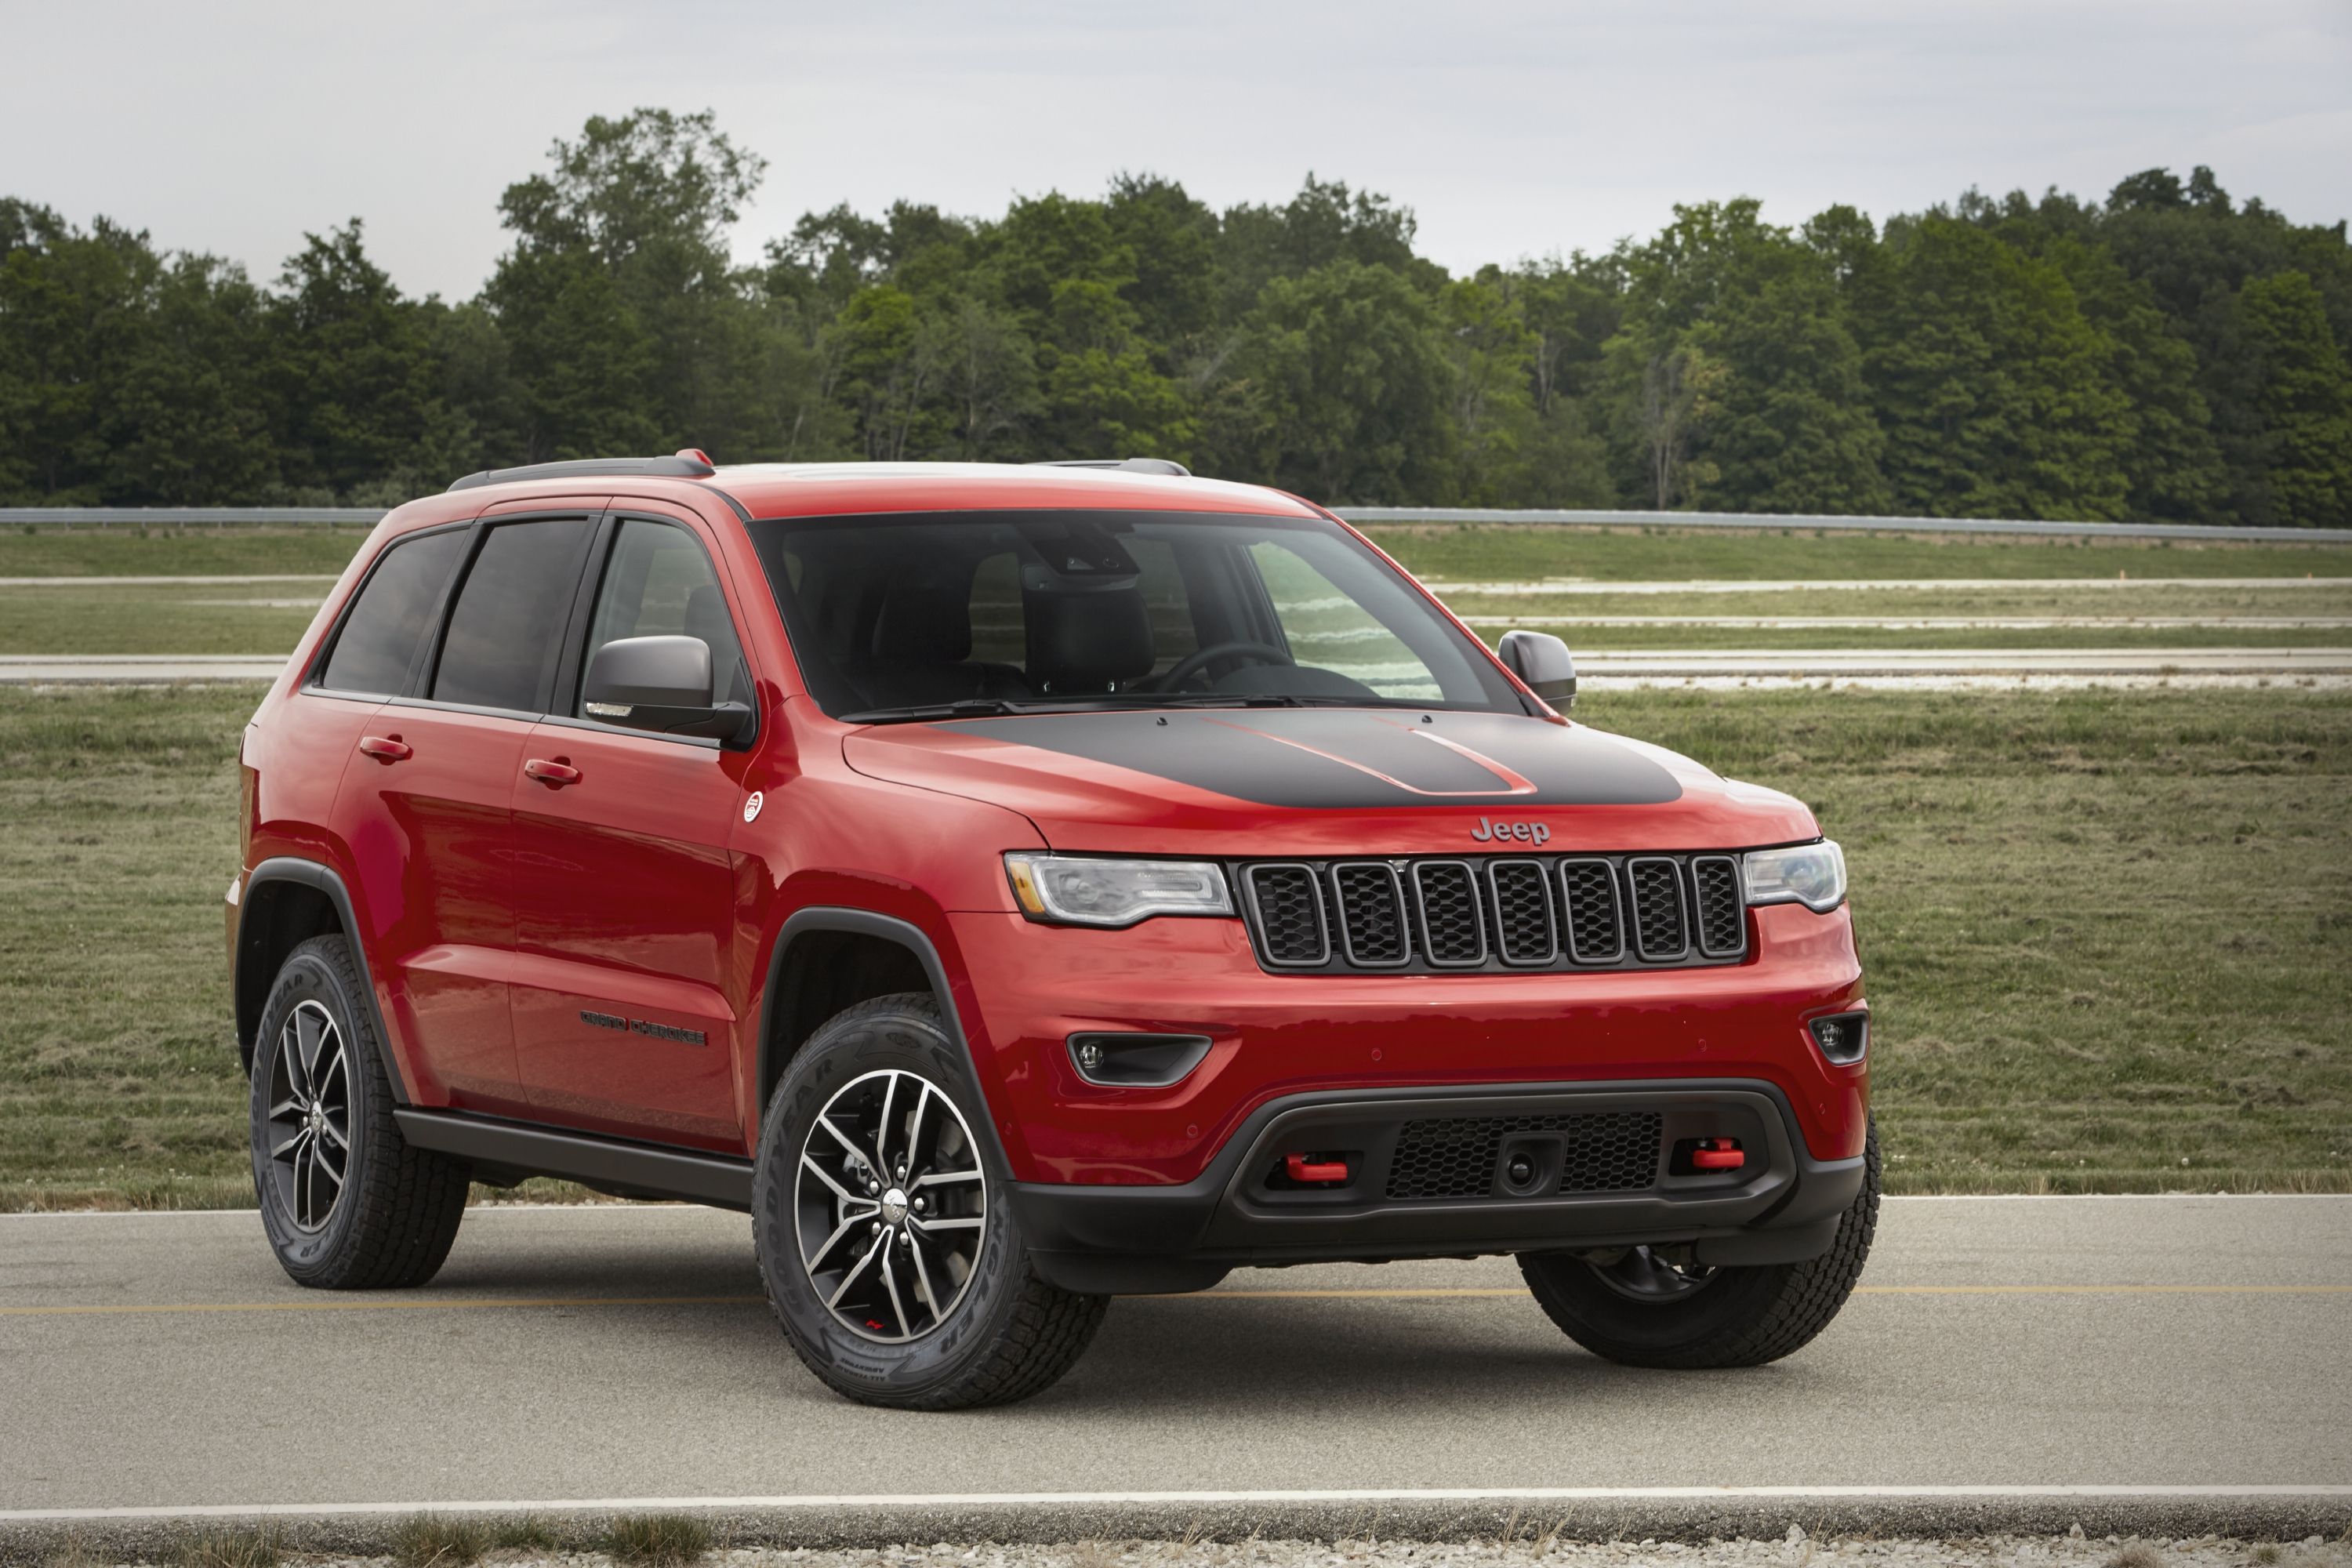 2021 Jeep Grand Cherokee Review, Pricing, and Specs